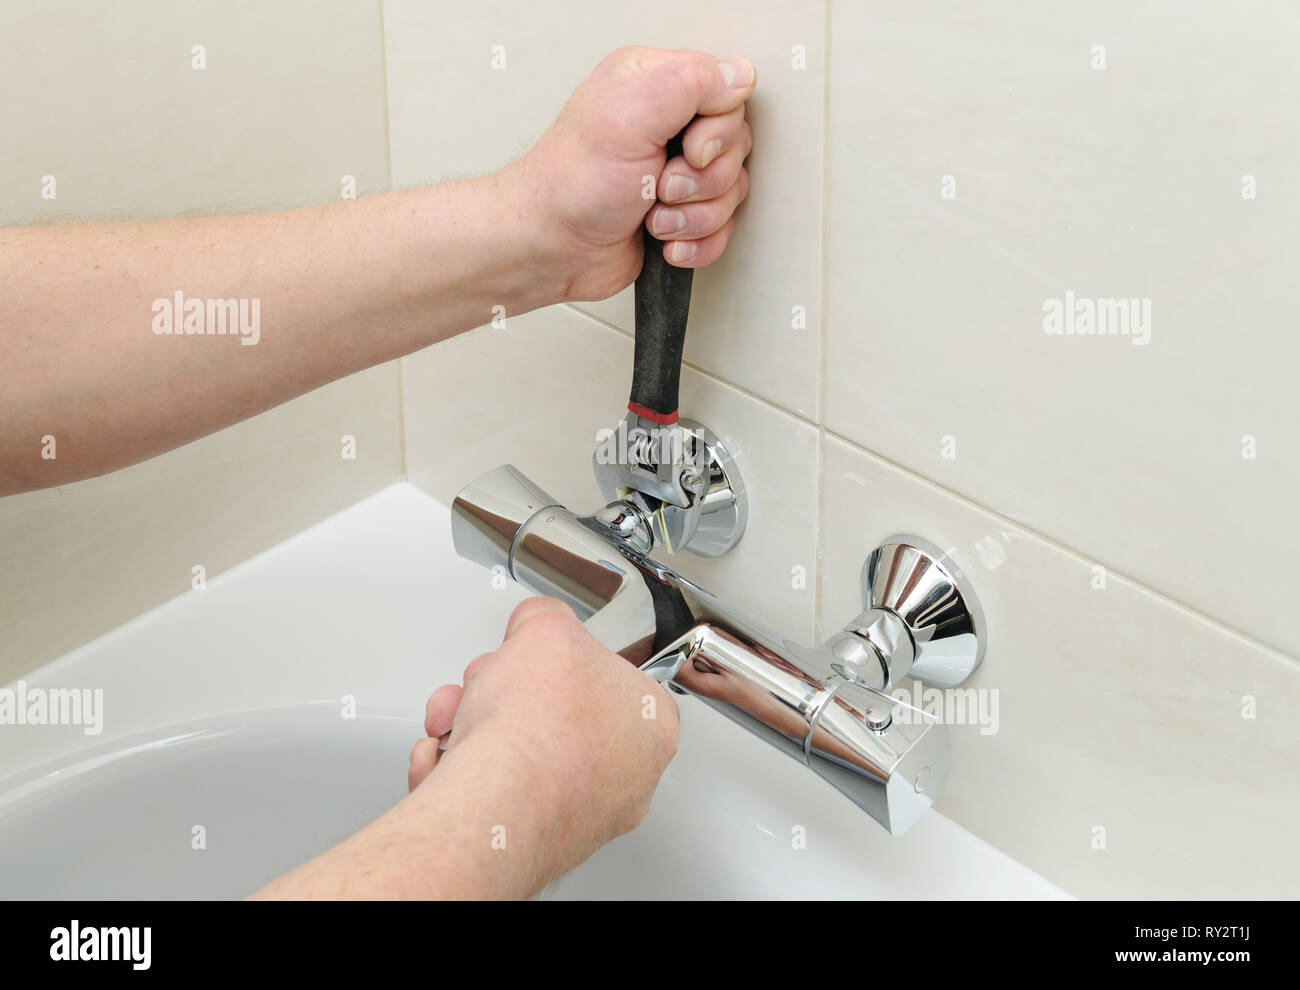 Installing faucet with thermostat. Man's hands are fixing bath tap into place. Stock Photo